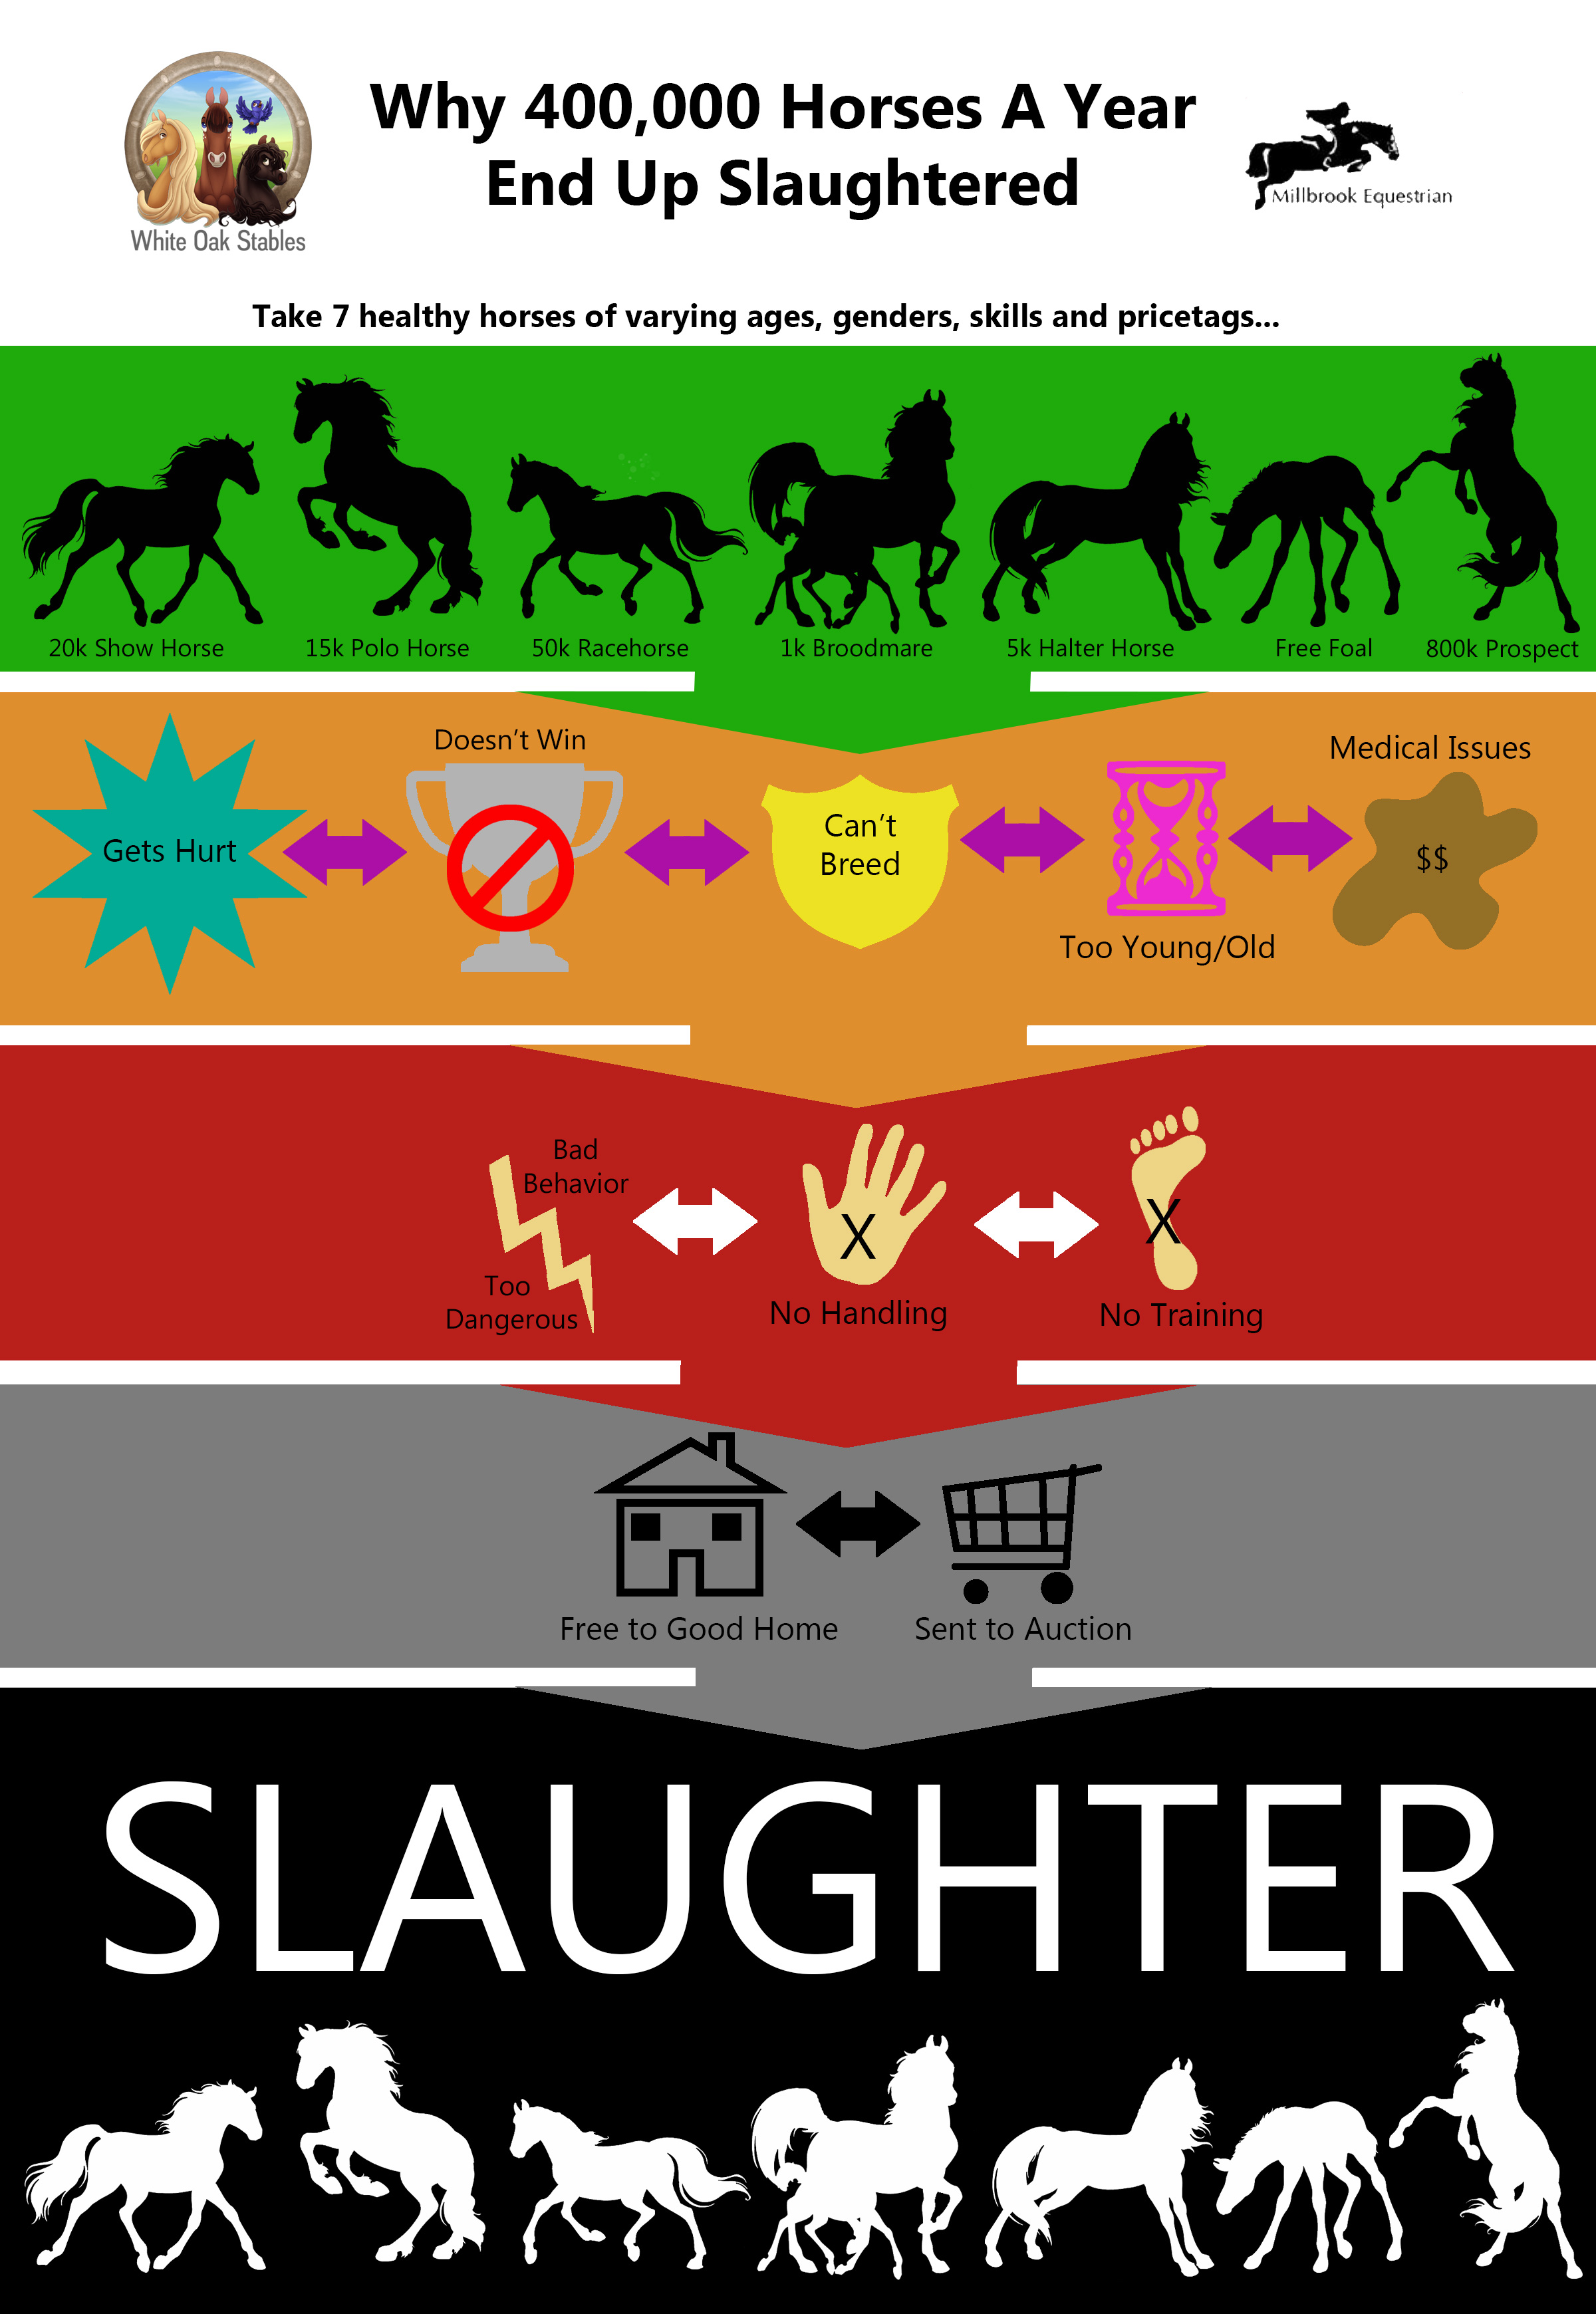 Why Horses Go To Slaughter